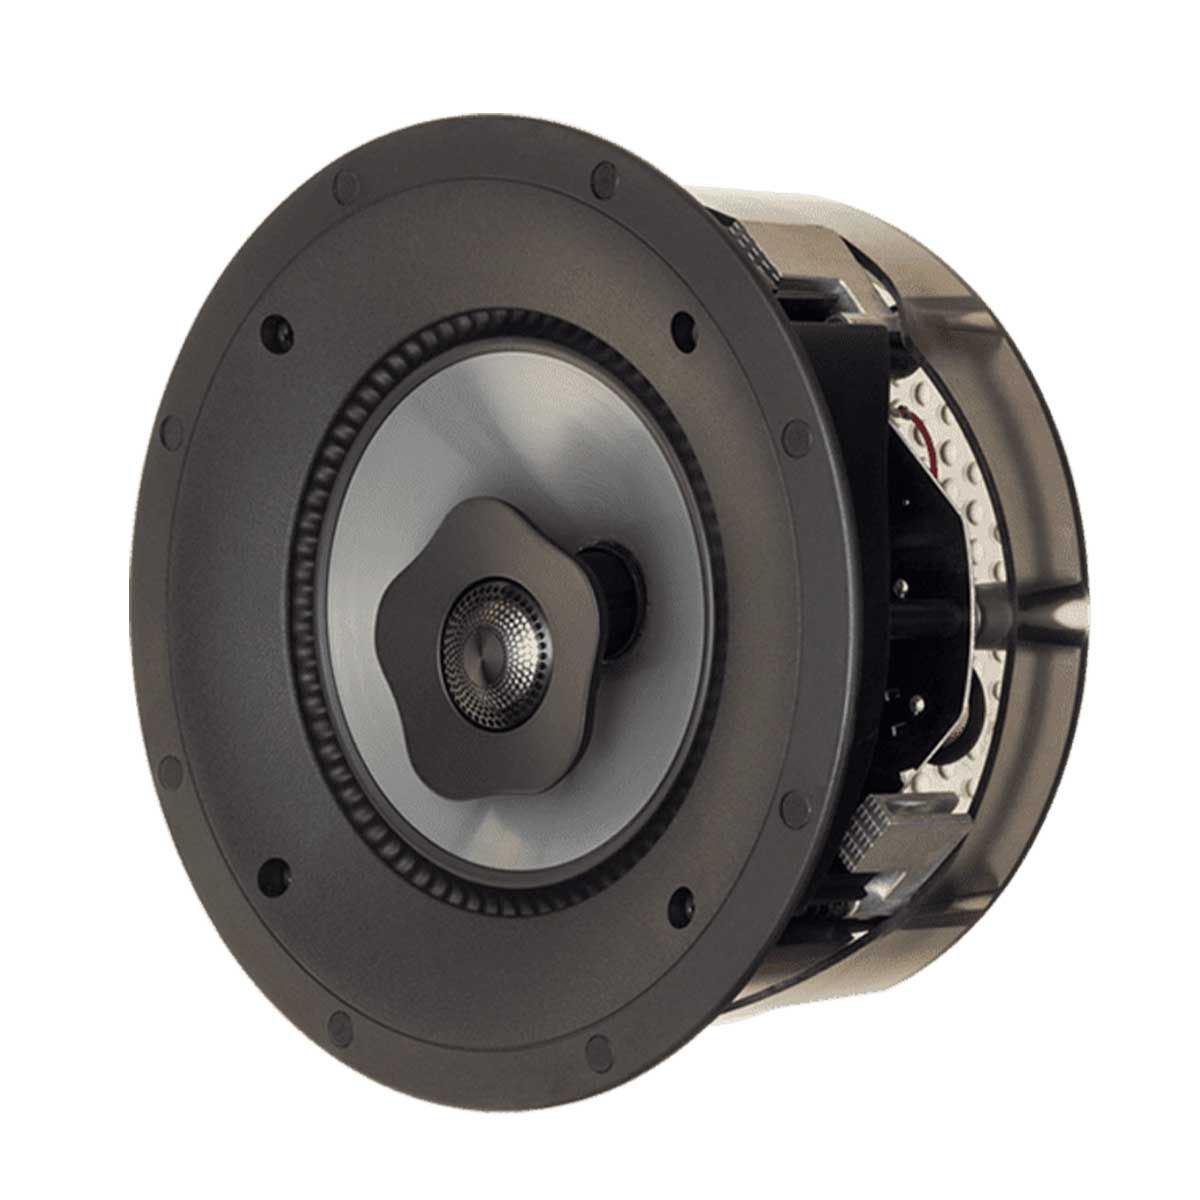 Paradigm CI Pro P65-R In-ceiling Speaker without grill